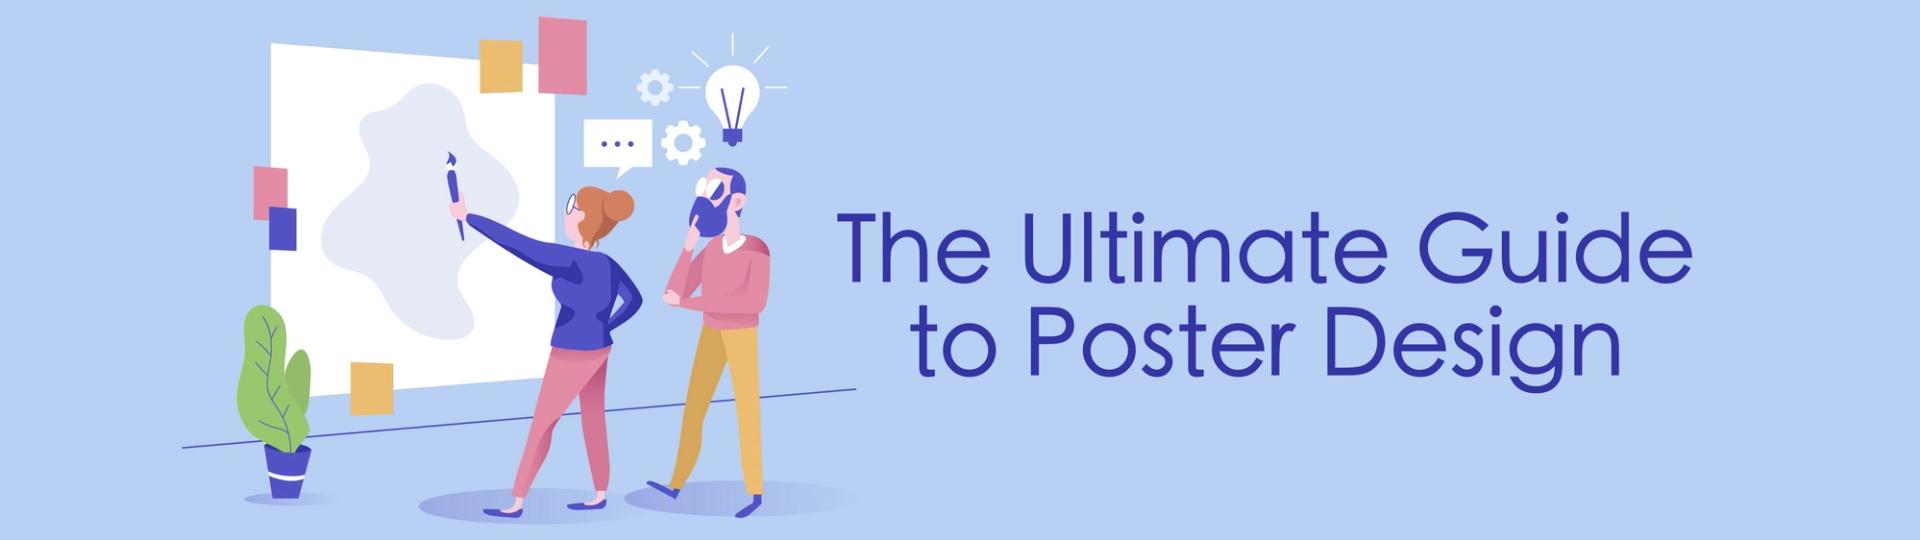 The Ultimate Guide to Poster Design